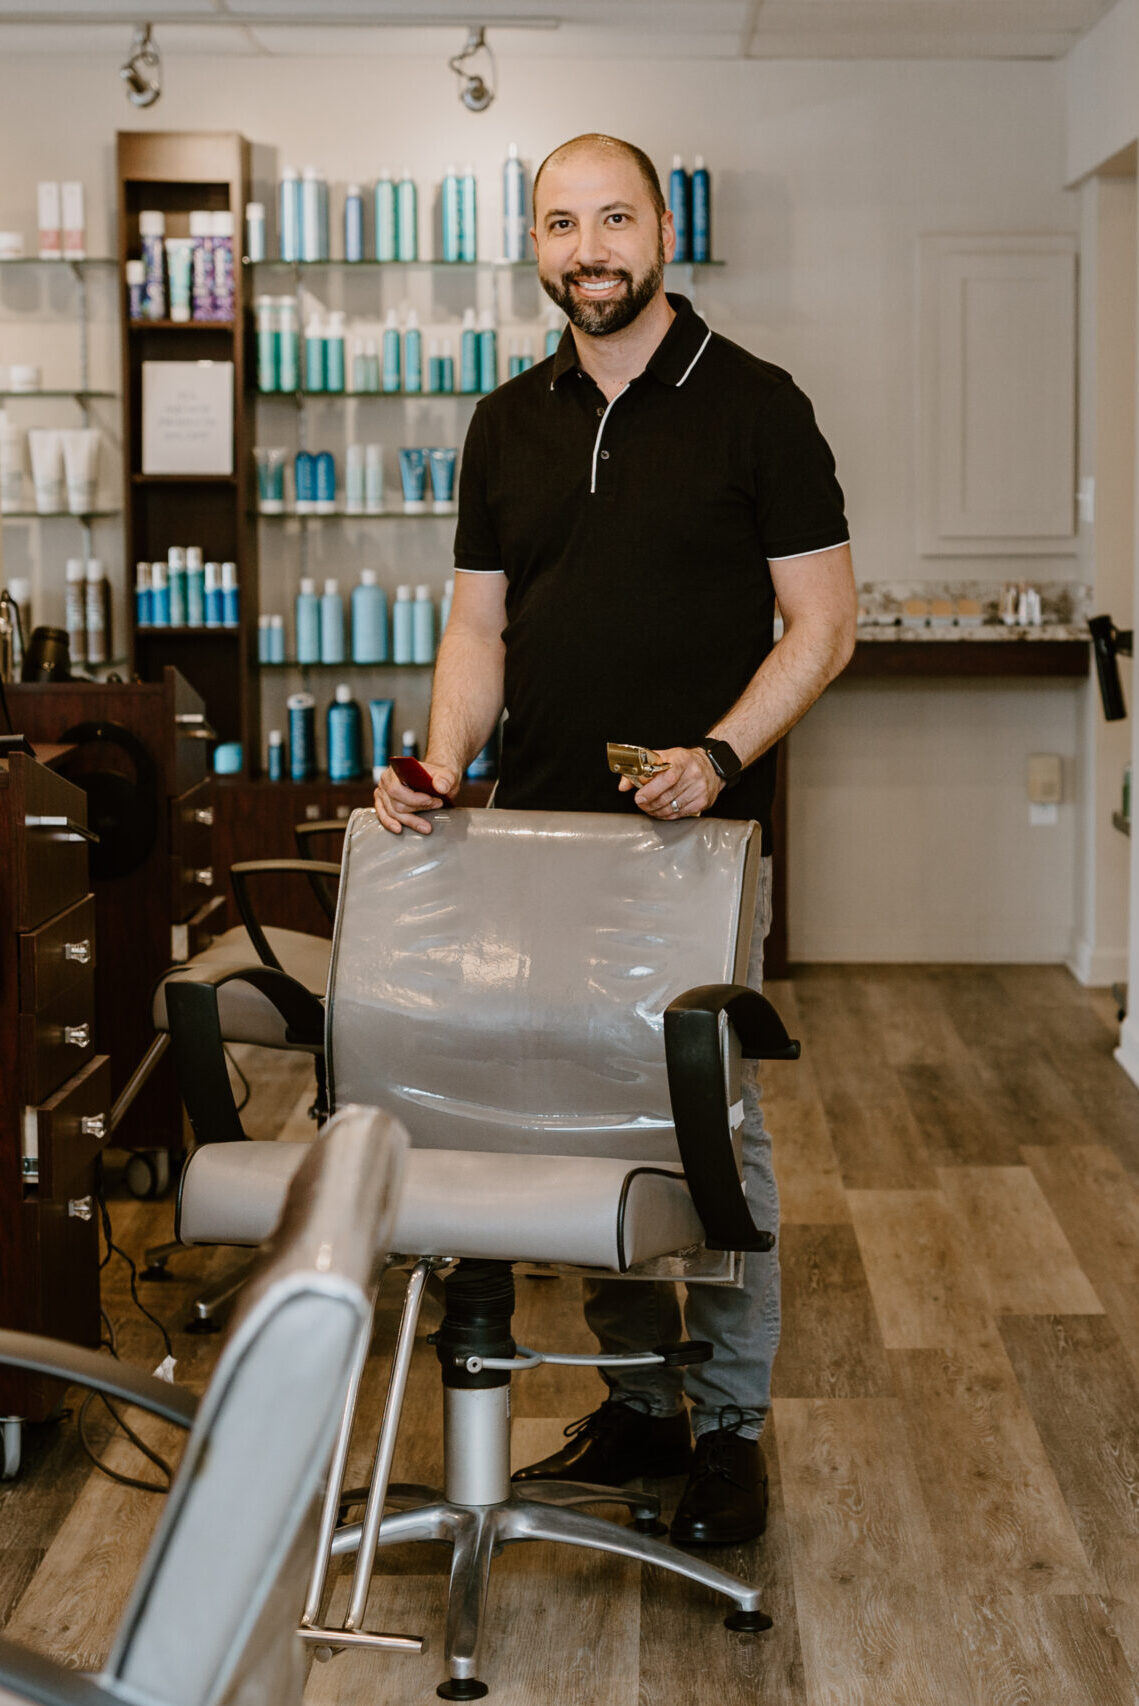 Charise’s Salon, a premier hair salon in Pittsburgh, PA, offers a wide range of services including hair cutting, coloring, eyelash extensions, and more.